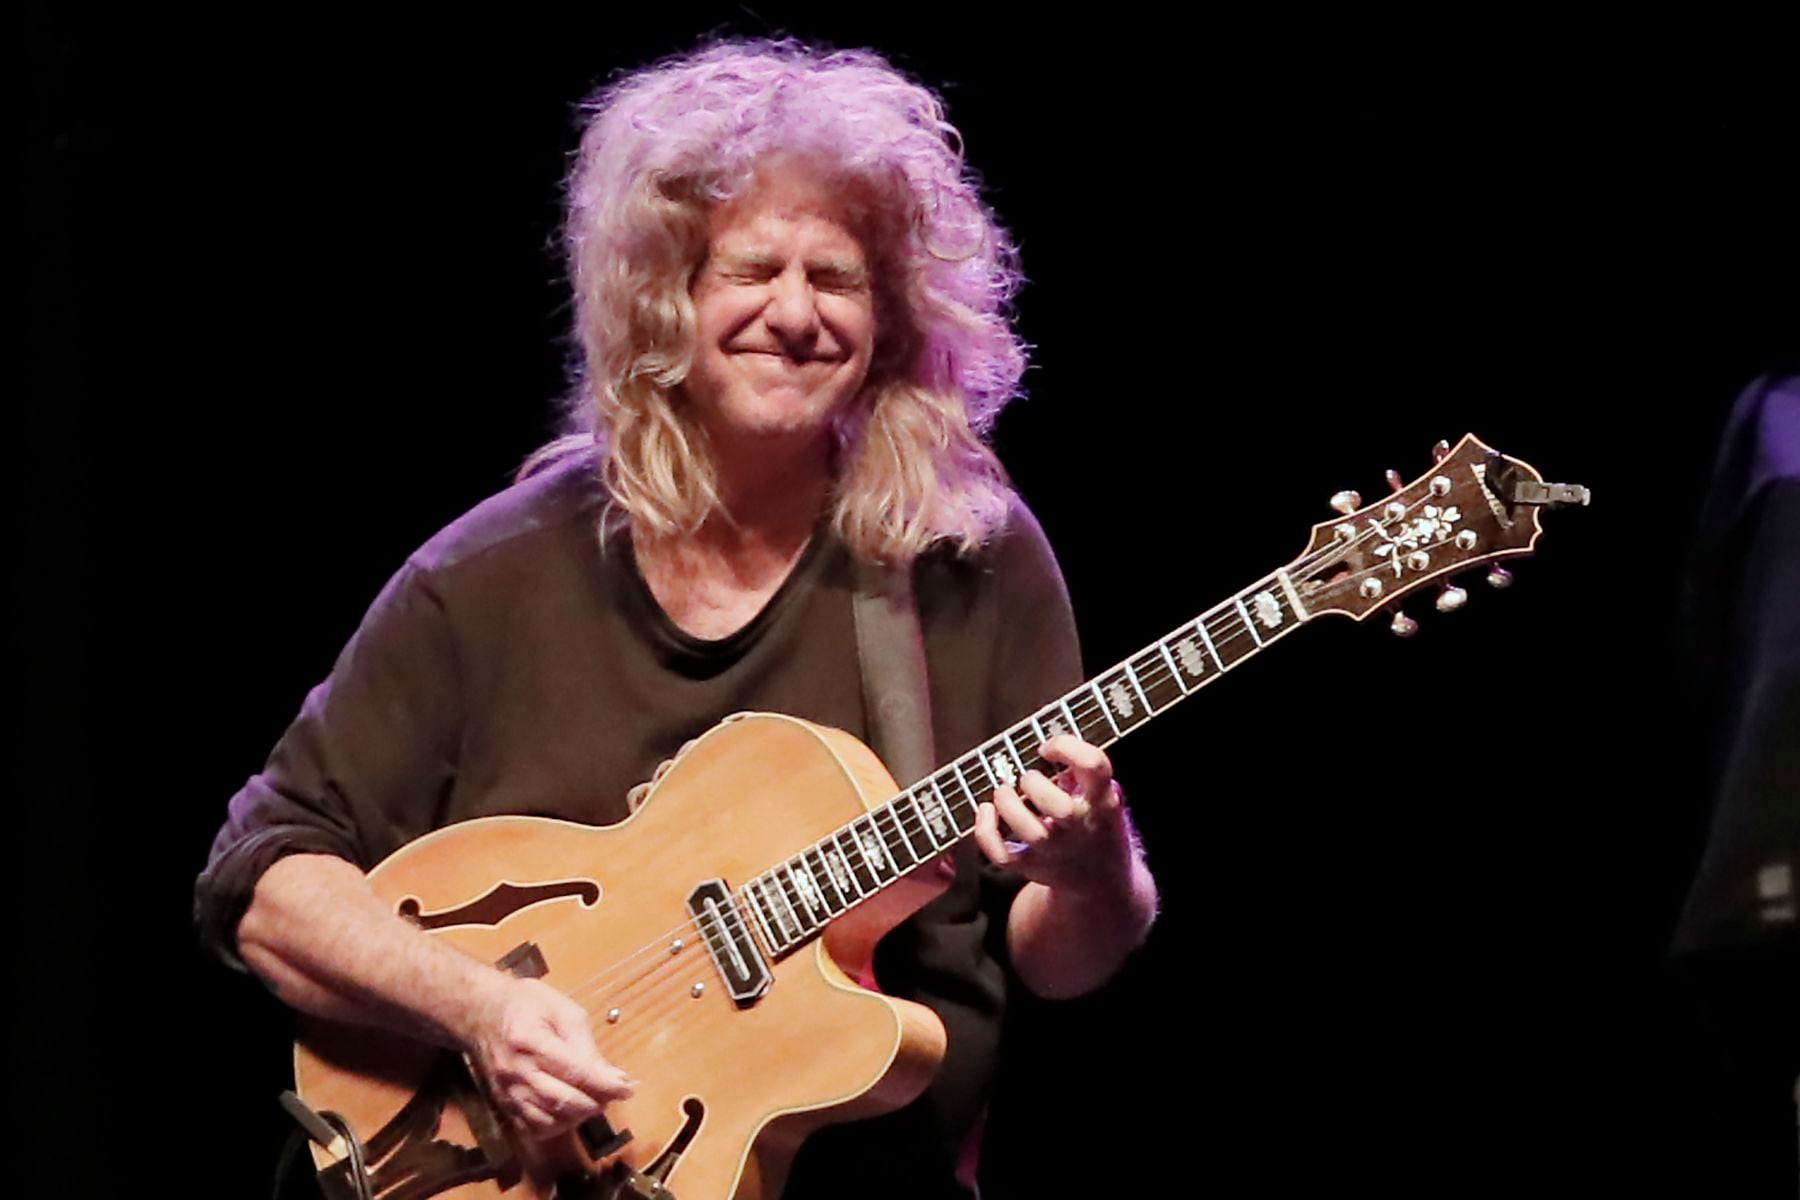 Pat Metheny brings new trio Side-Eye to the Keswick with a virtuosic career-spanning performance